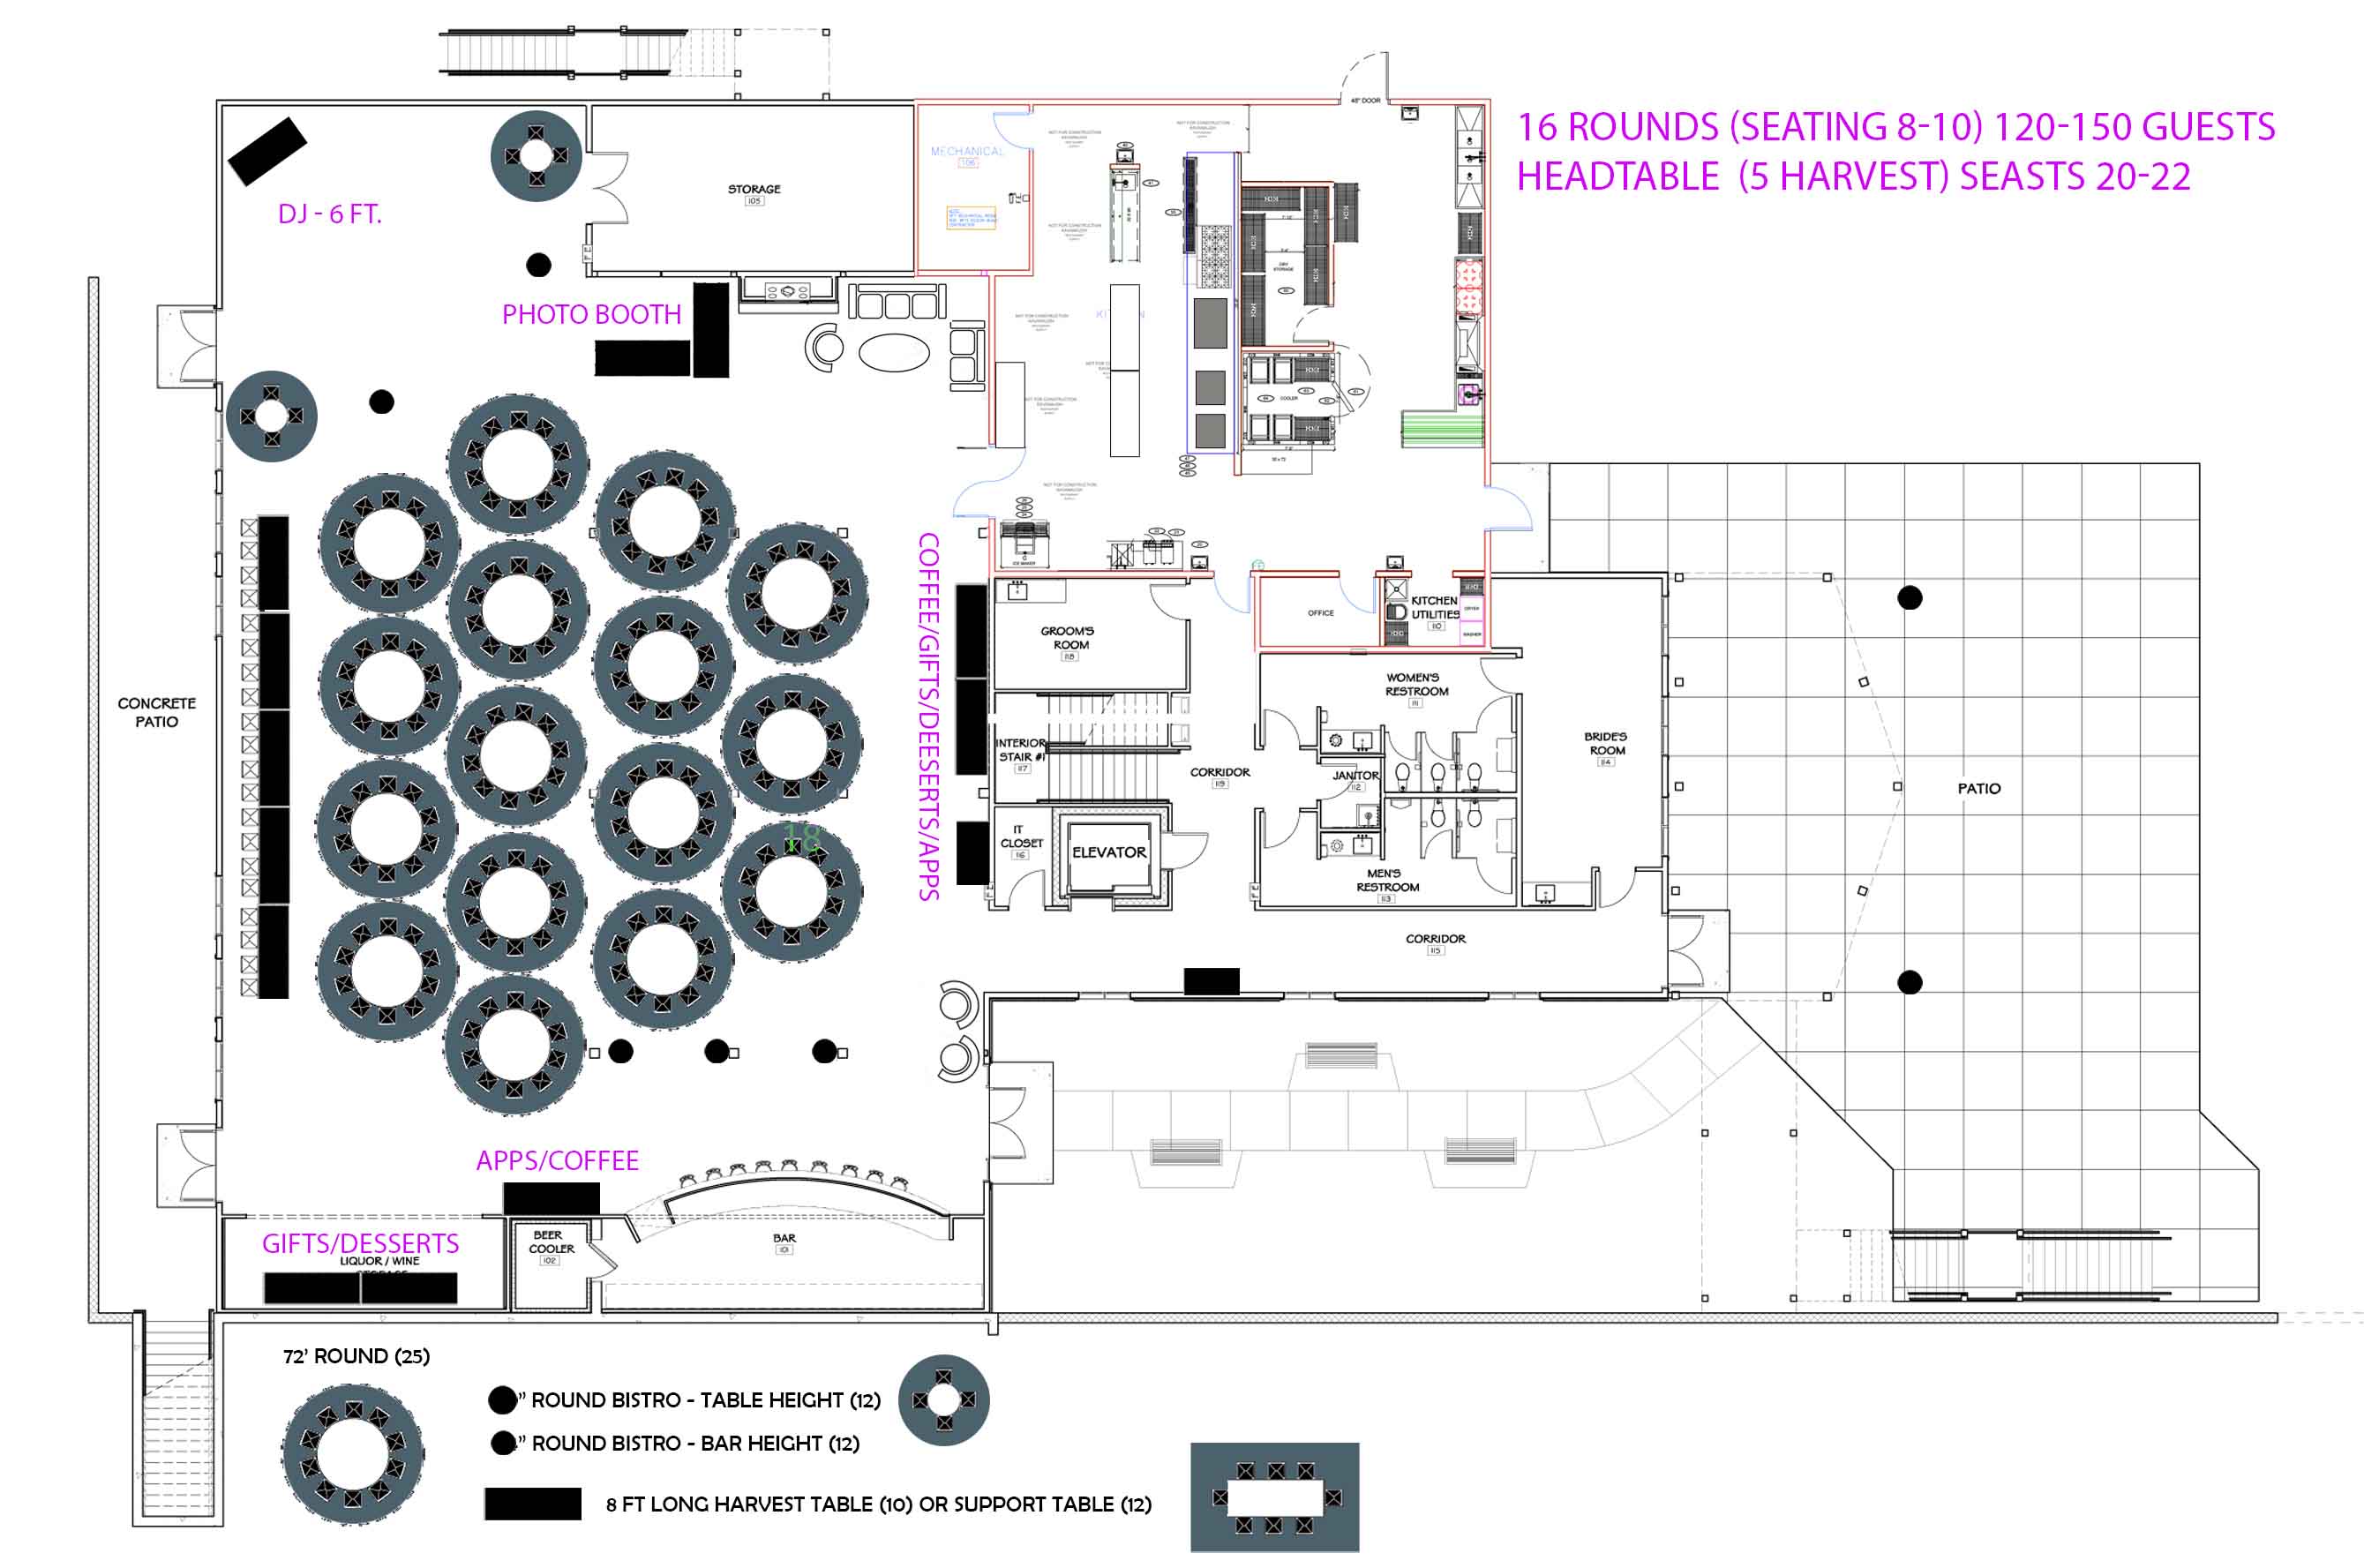 Custom Layout Options For Events, How Many Round Tables Do You Need For 150 Guests